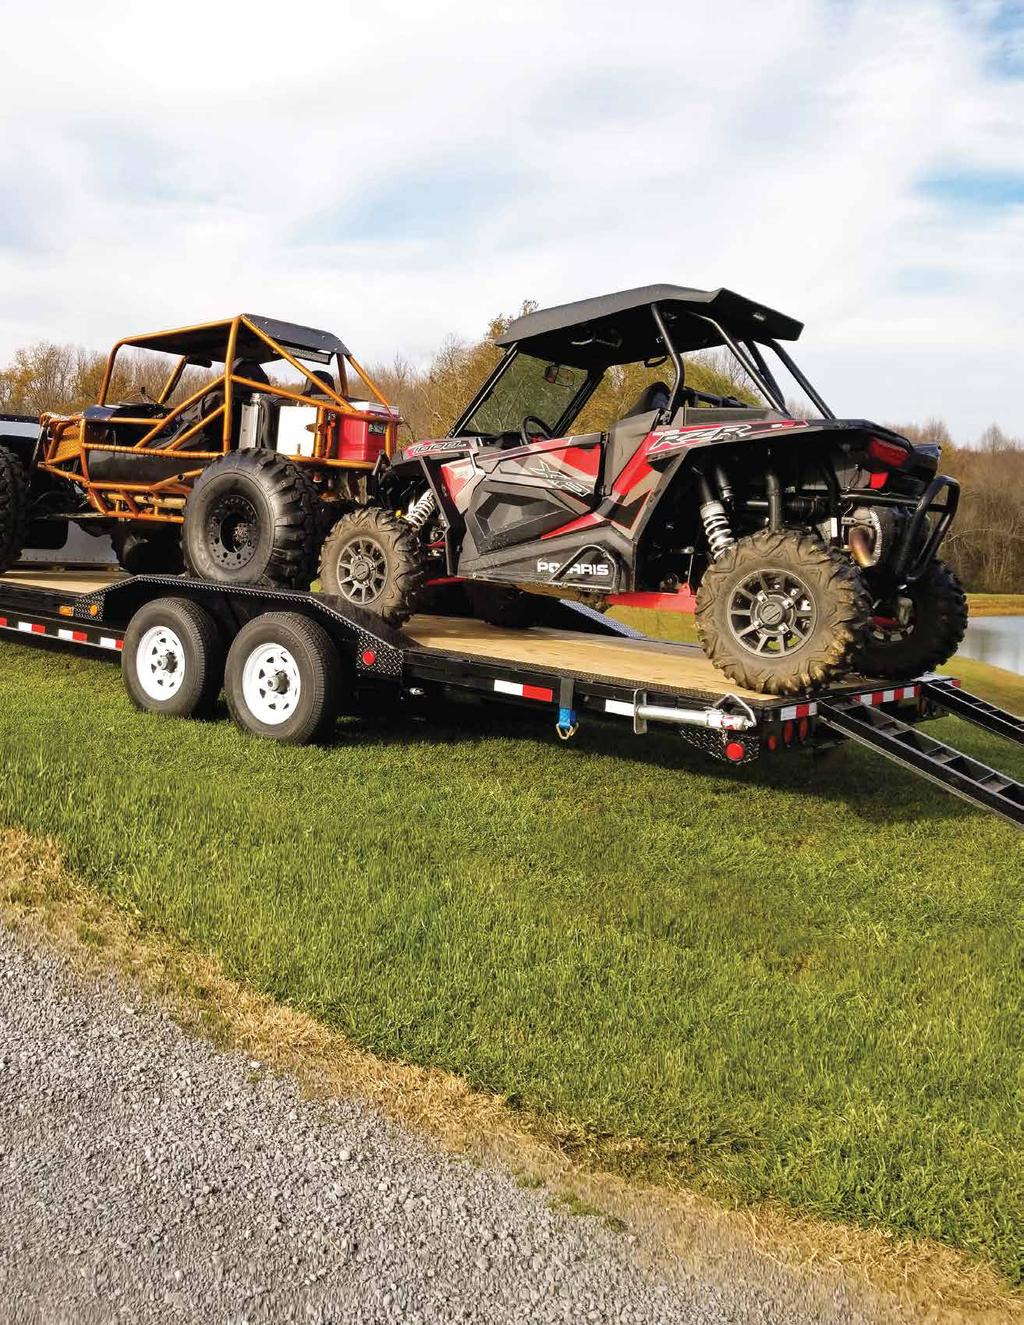 PJ Trailers leads the industry with quality products, customization and high levels of